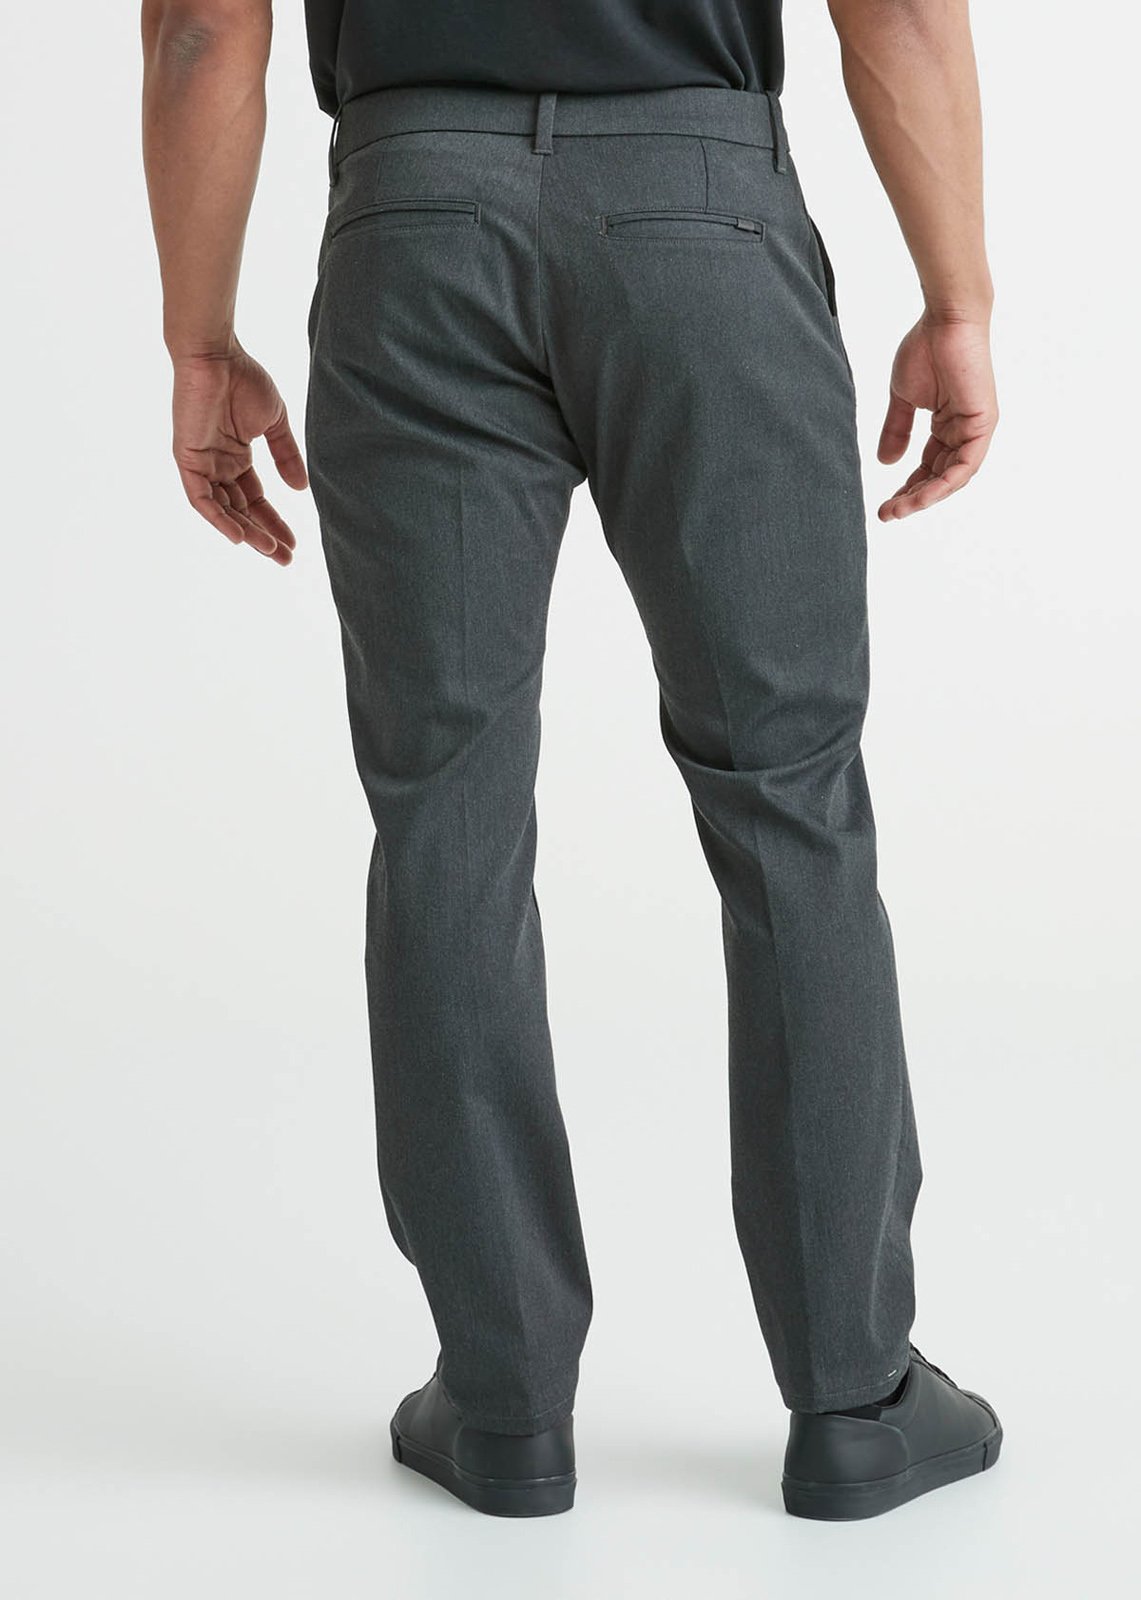 FLEX Relaxed Fit Straight Leg Cargo Pants For Men | Relaxed Fit Cargo |  Dickies - Dickies Canada